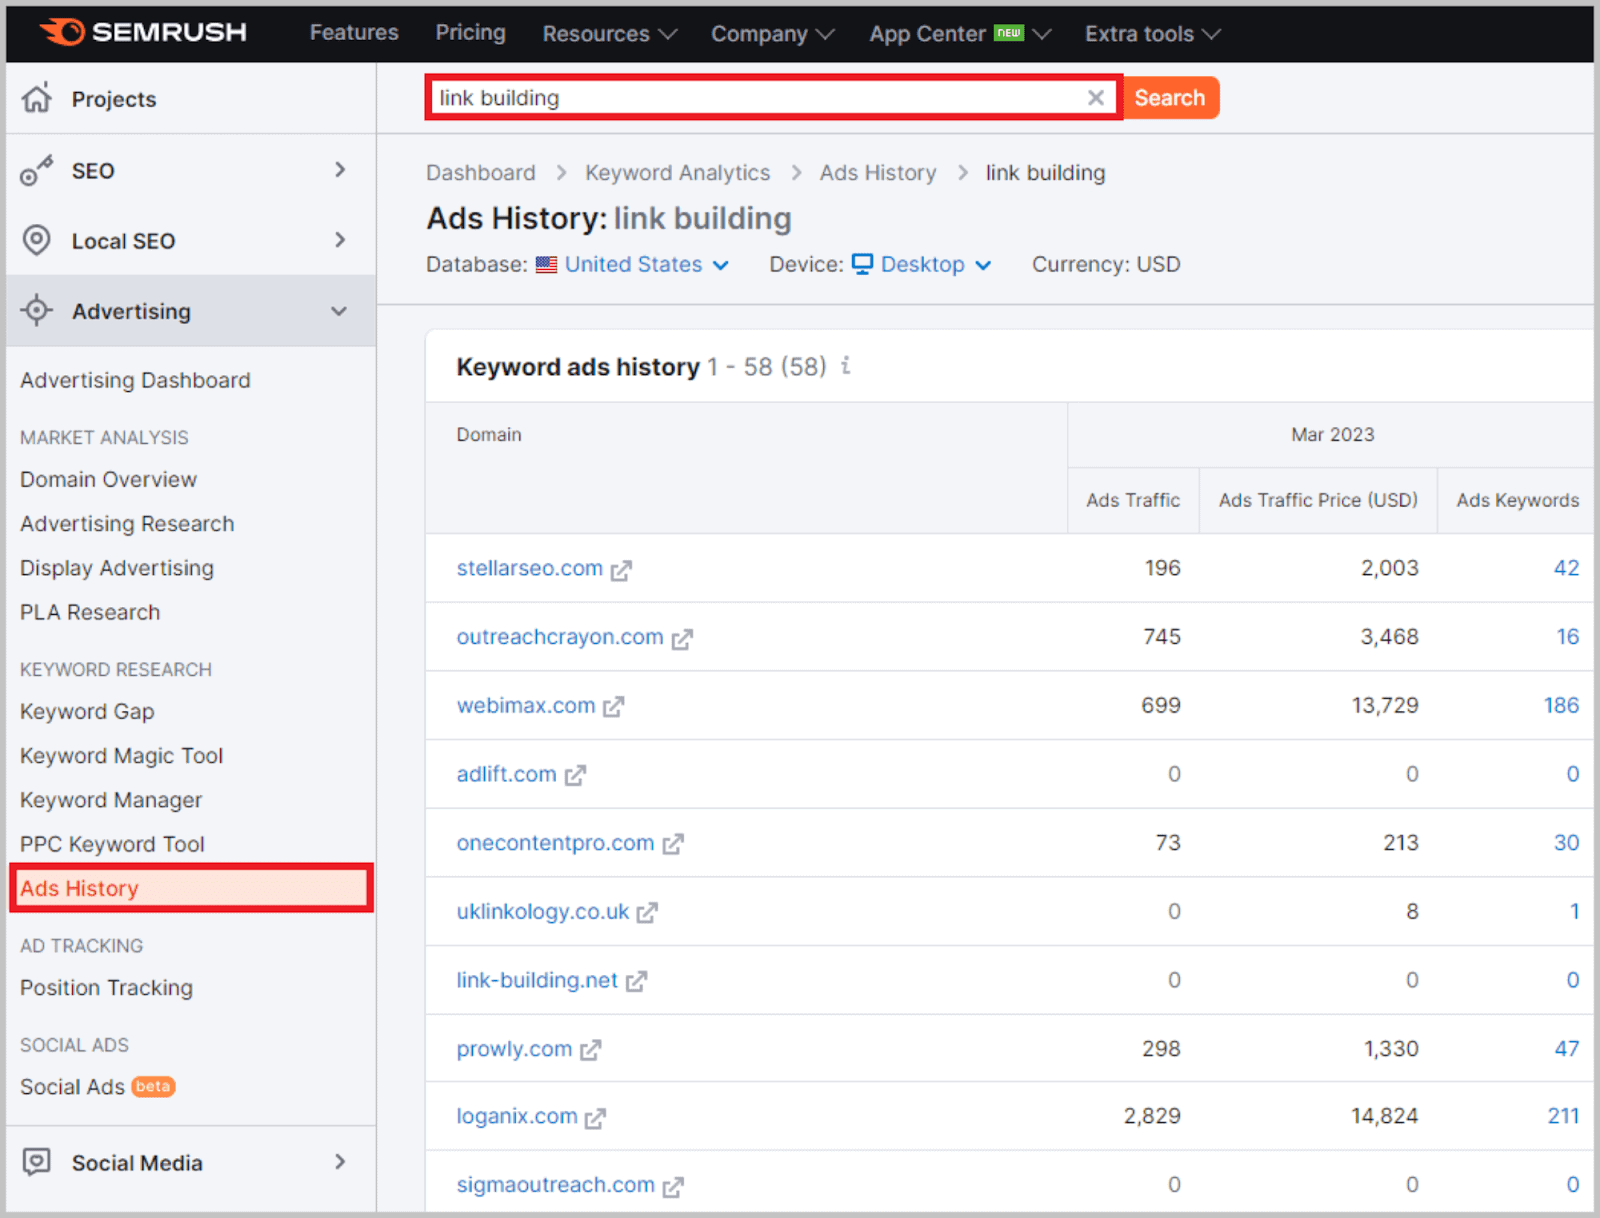 See other domains using your primary keyword in their ads